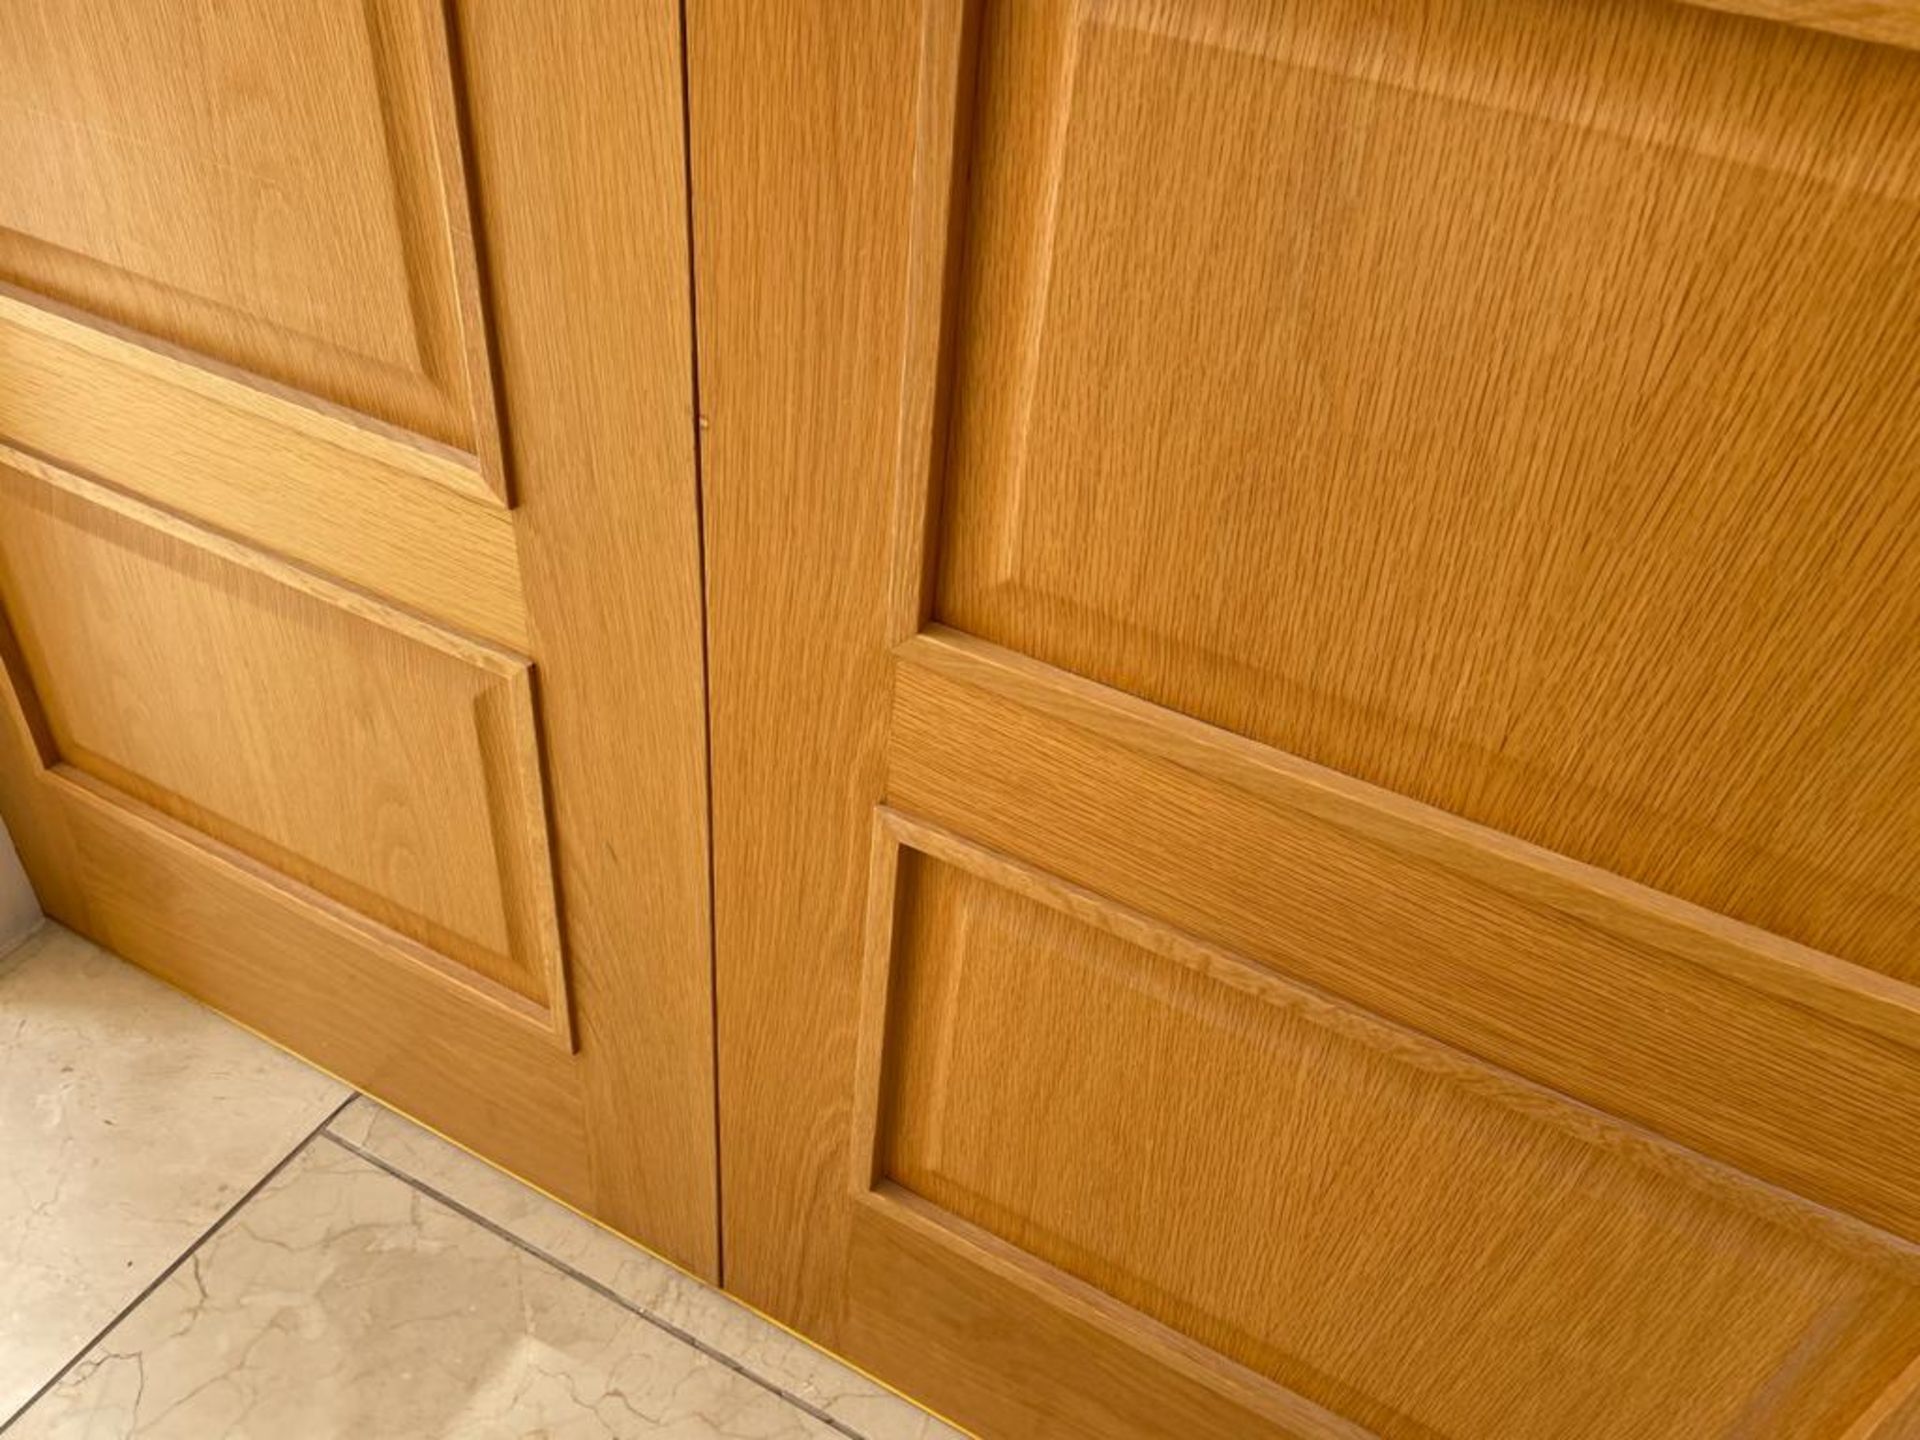 1 x Set of Roble Solid Oak Internal Double Doors - 45mm Thickness Fire Doors - NO VAT ON THE - Image 6 of 10